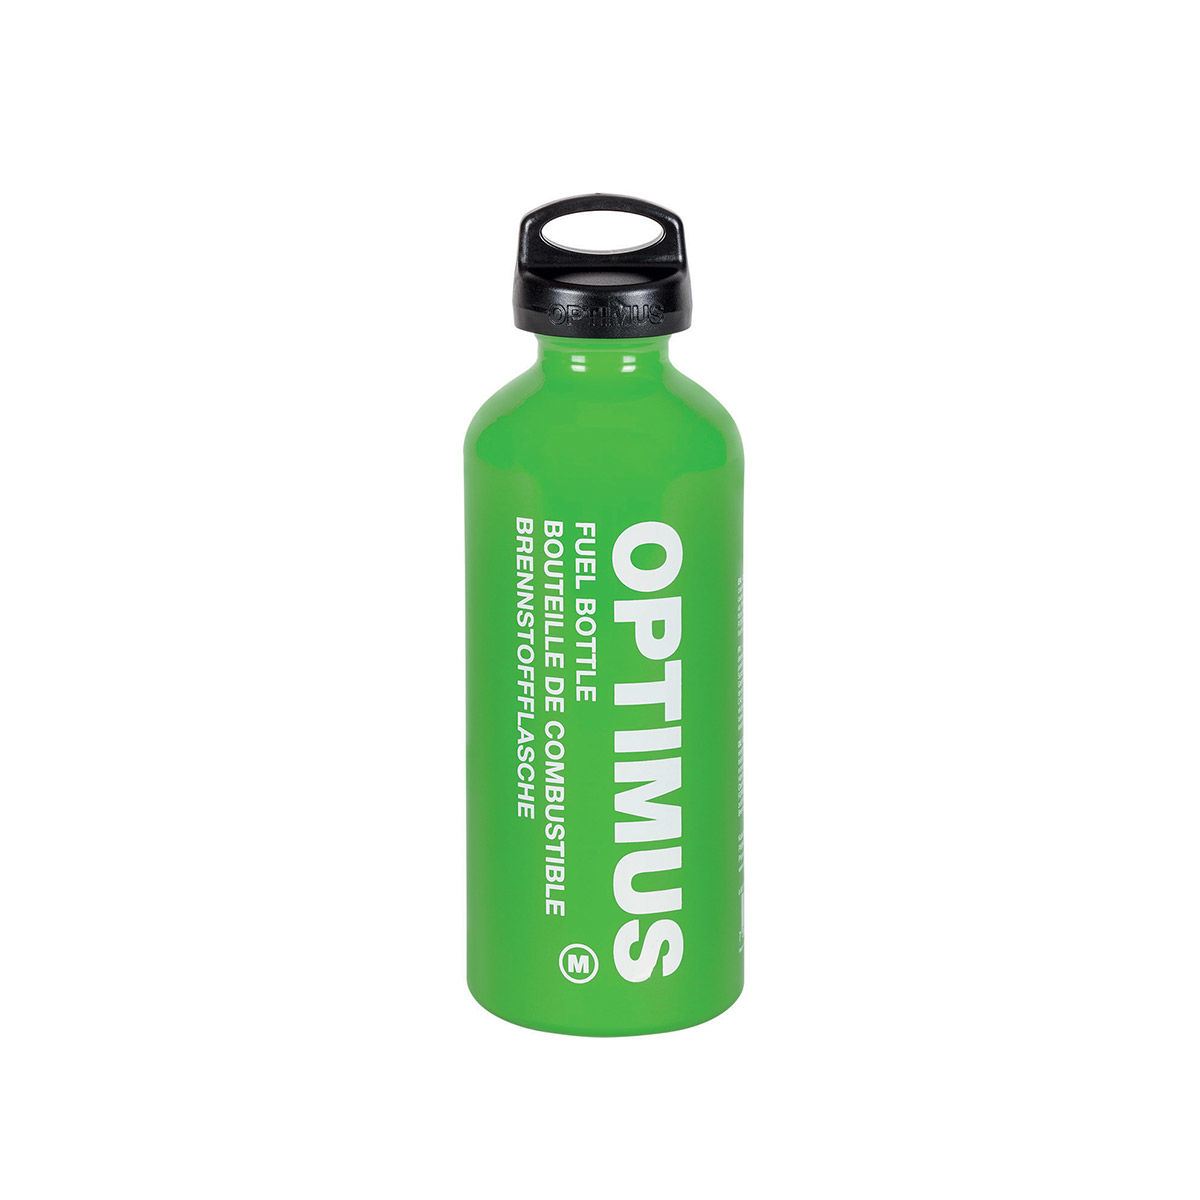 Bouteille combustible Optimus M 530 ml